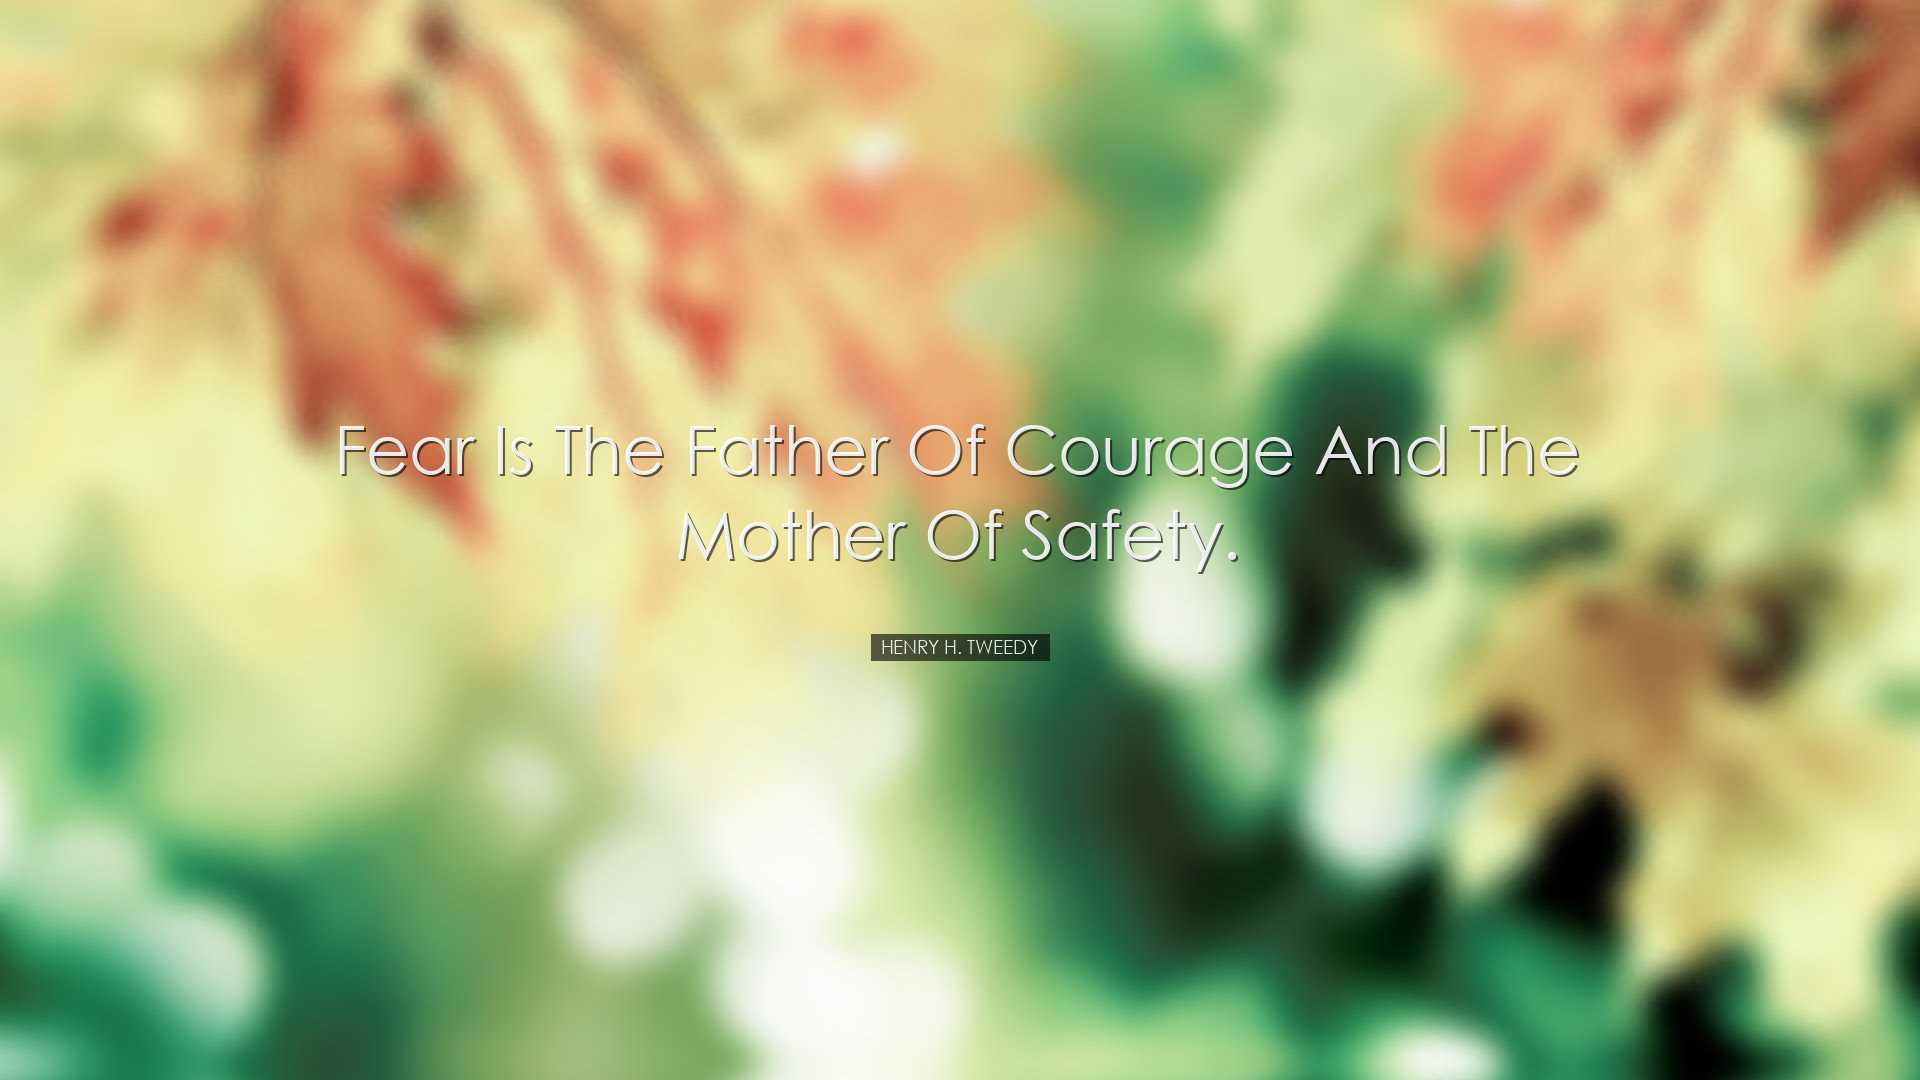 Fear is the father of courage and the mother of safety. - Henry H.